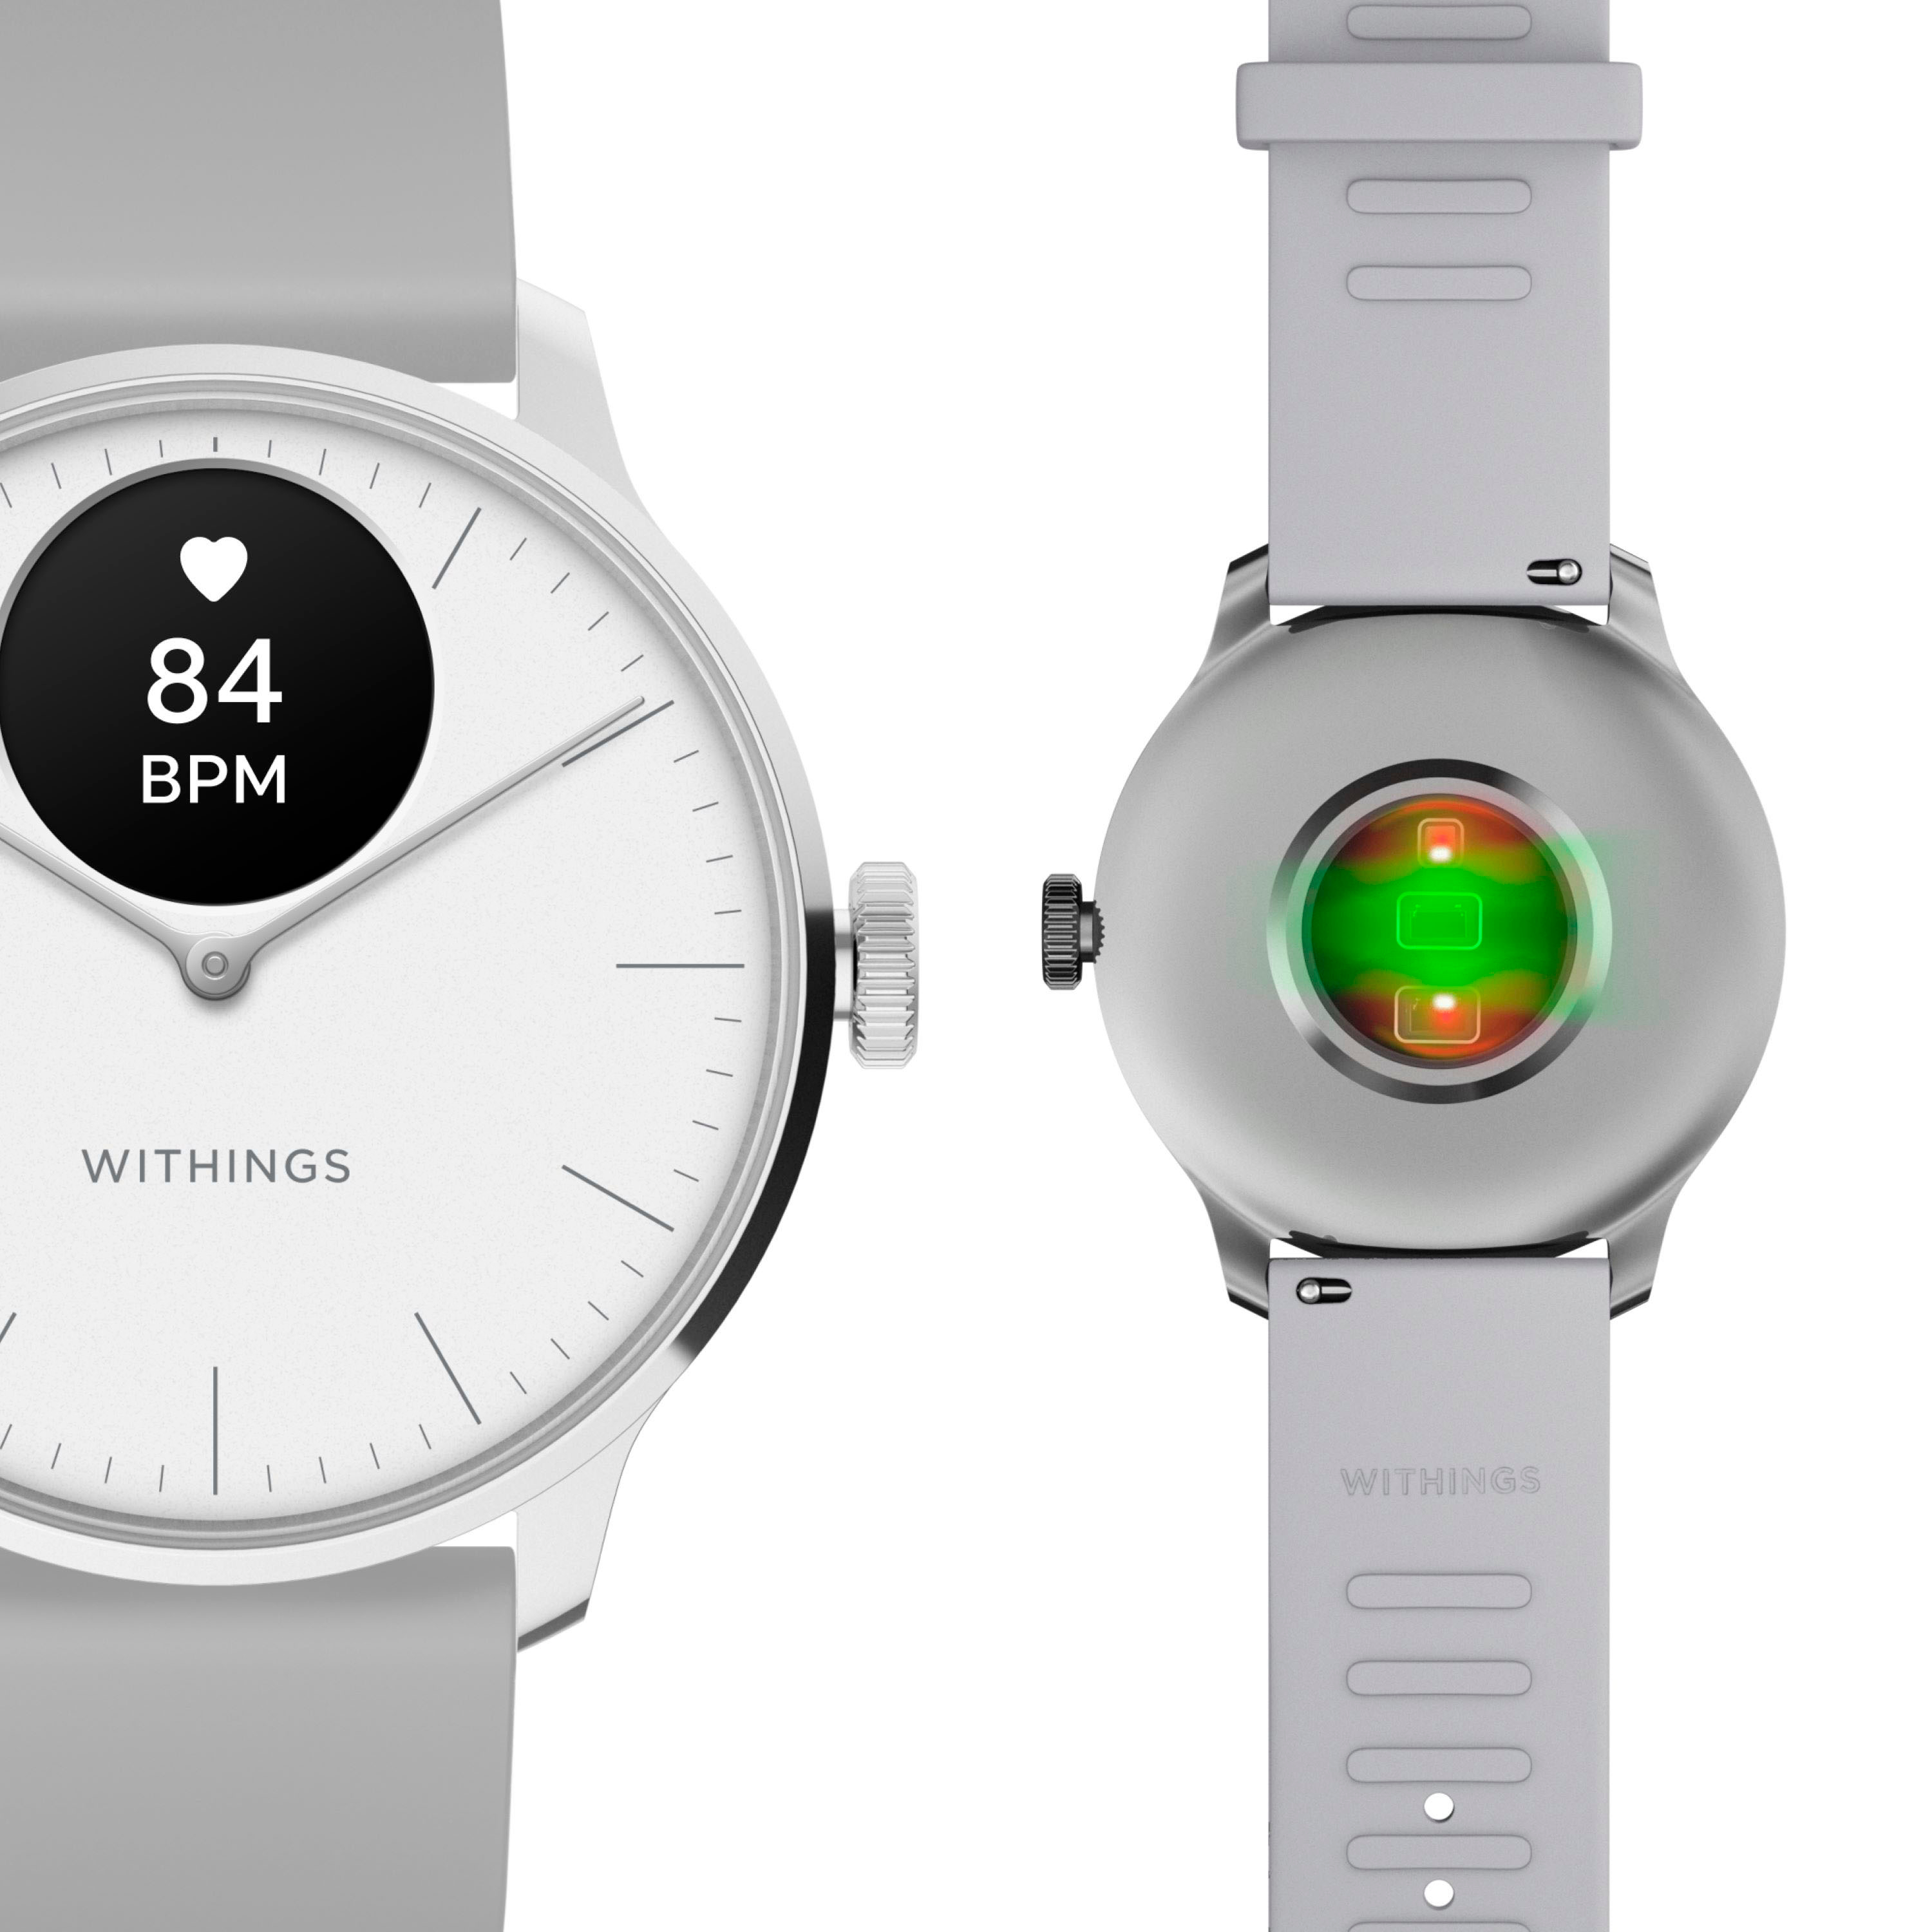 Withings ScanWatch 2: Unboxing and first look 